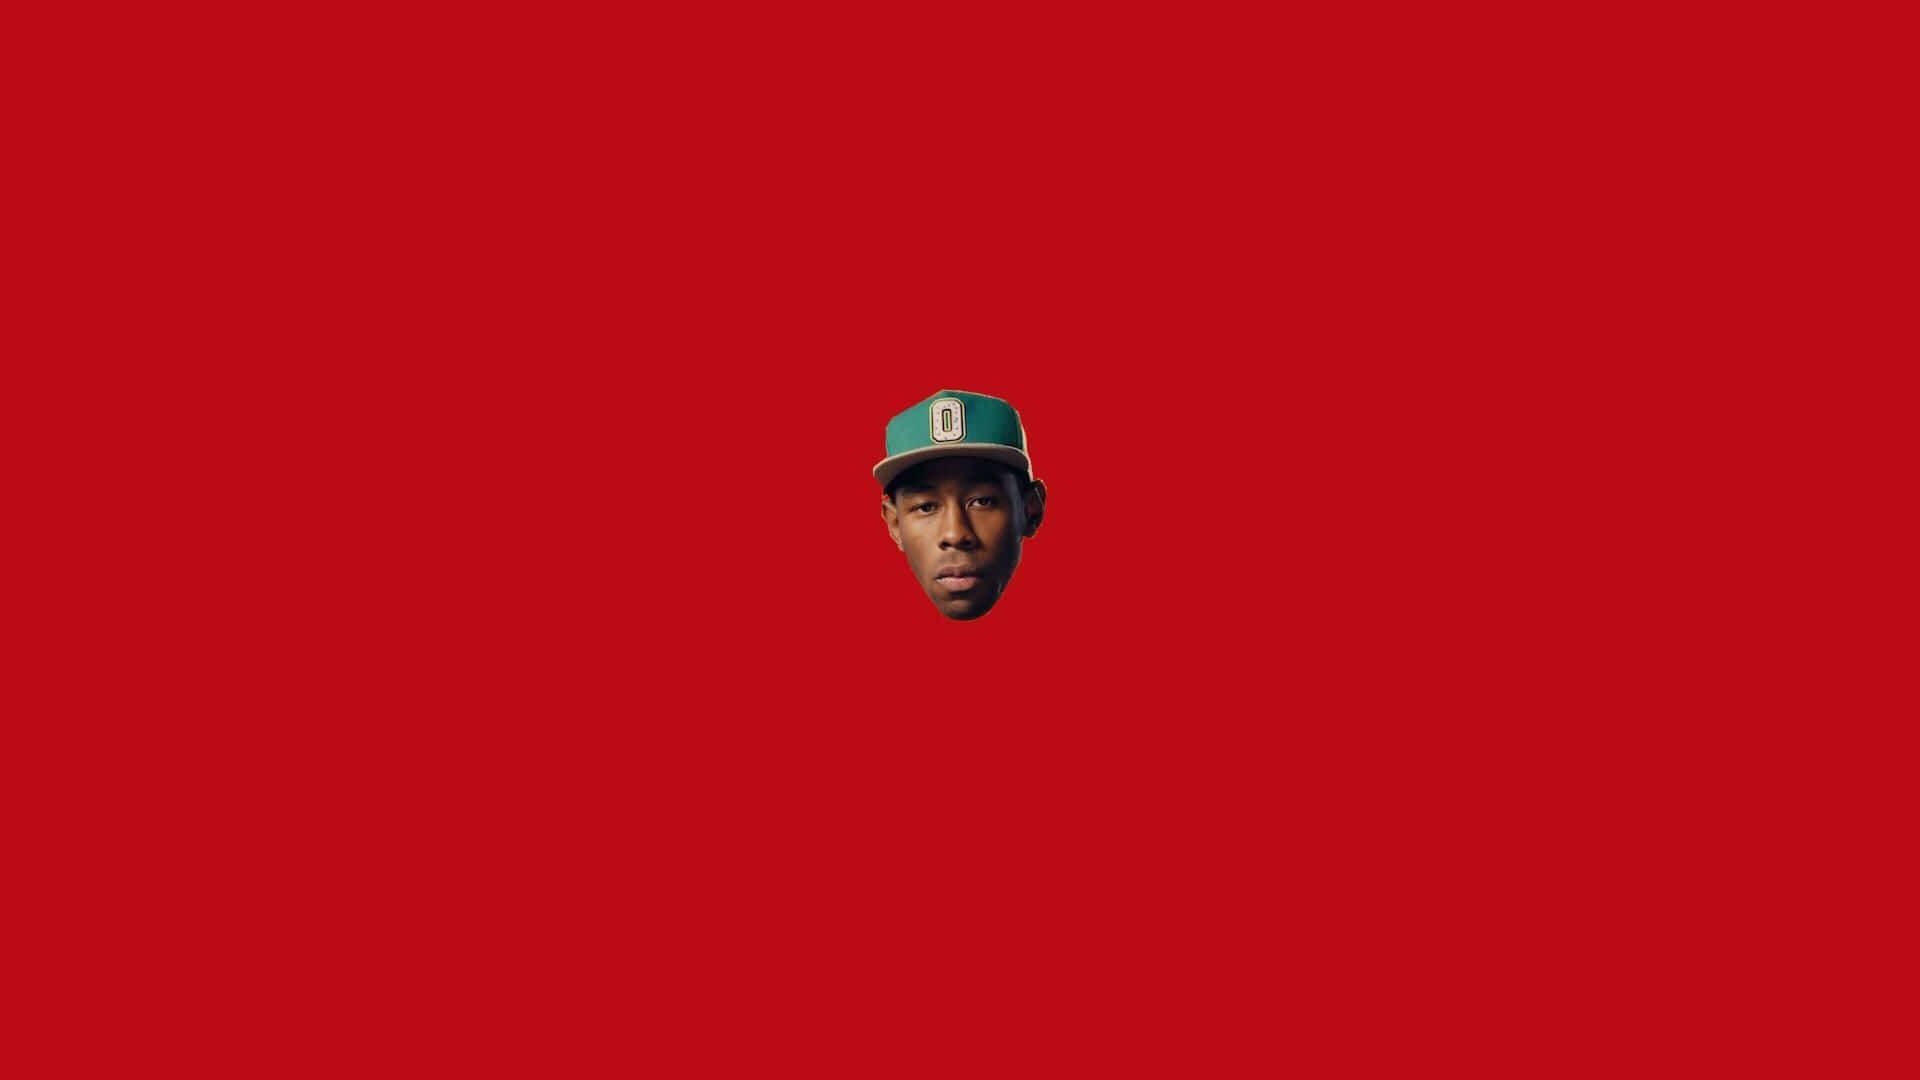 Tyler The Creator Multiple Face Expressions In One Photo HD Music Wallpapers   HD Wallpapers  ID 37720